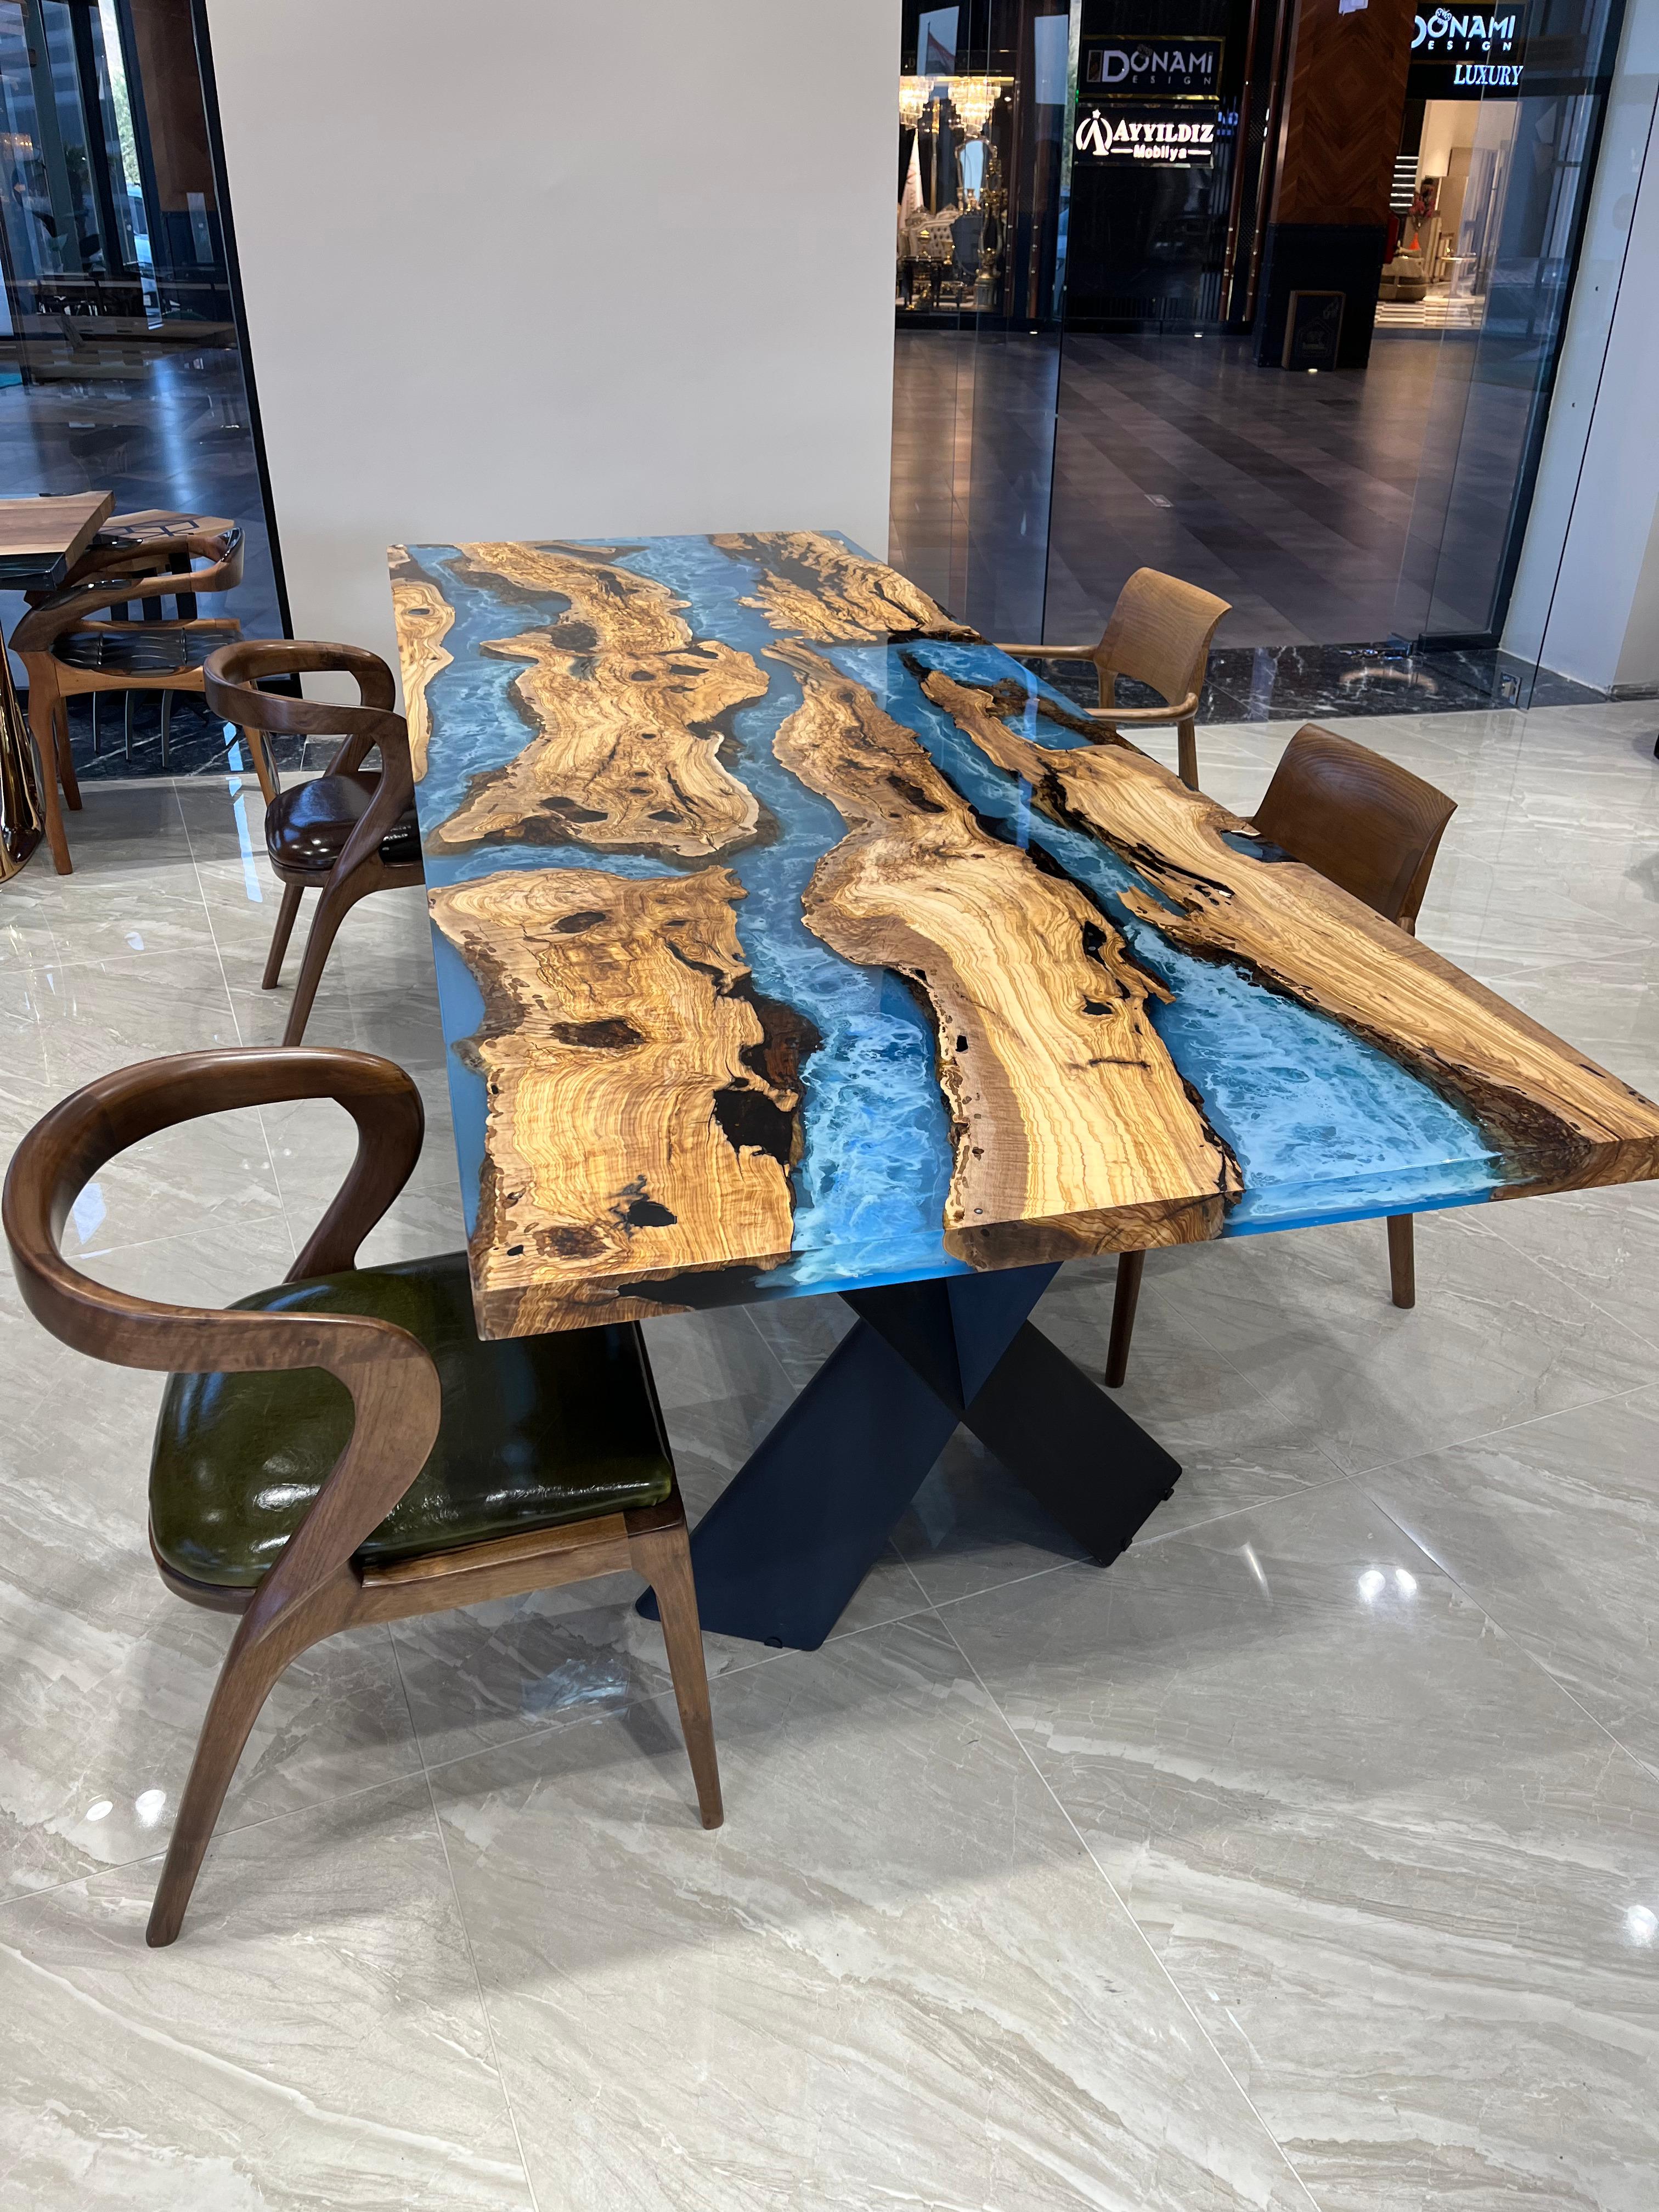 Custom Olive Epoxy Table

This stunning table is made of Mediterranean Olive wood. The unique beauty of the natural curves of olive wood combined with epoxy is seen in this table.

All woods have its own natural shape. Therefore, each one has its